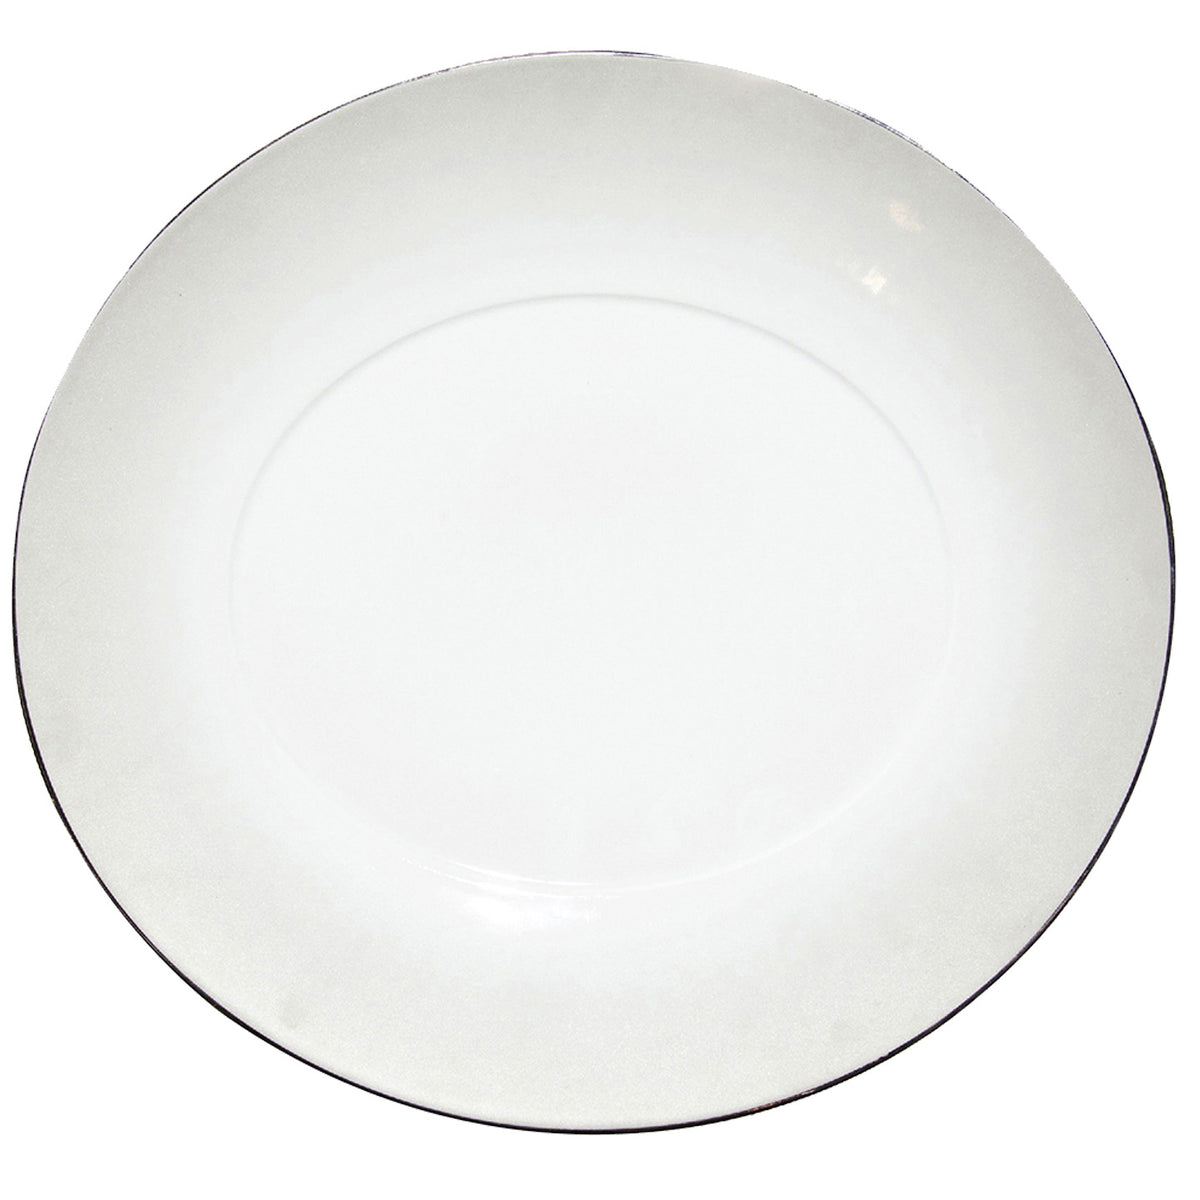 Epure Grey Oval Charger Plate